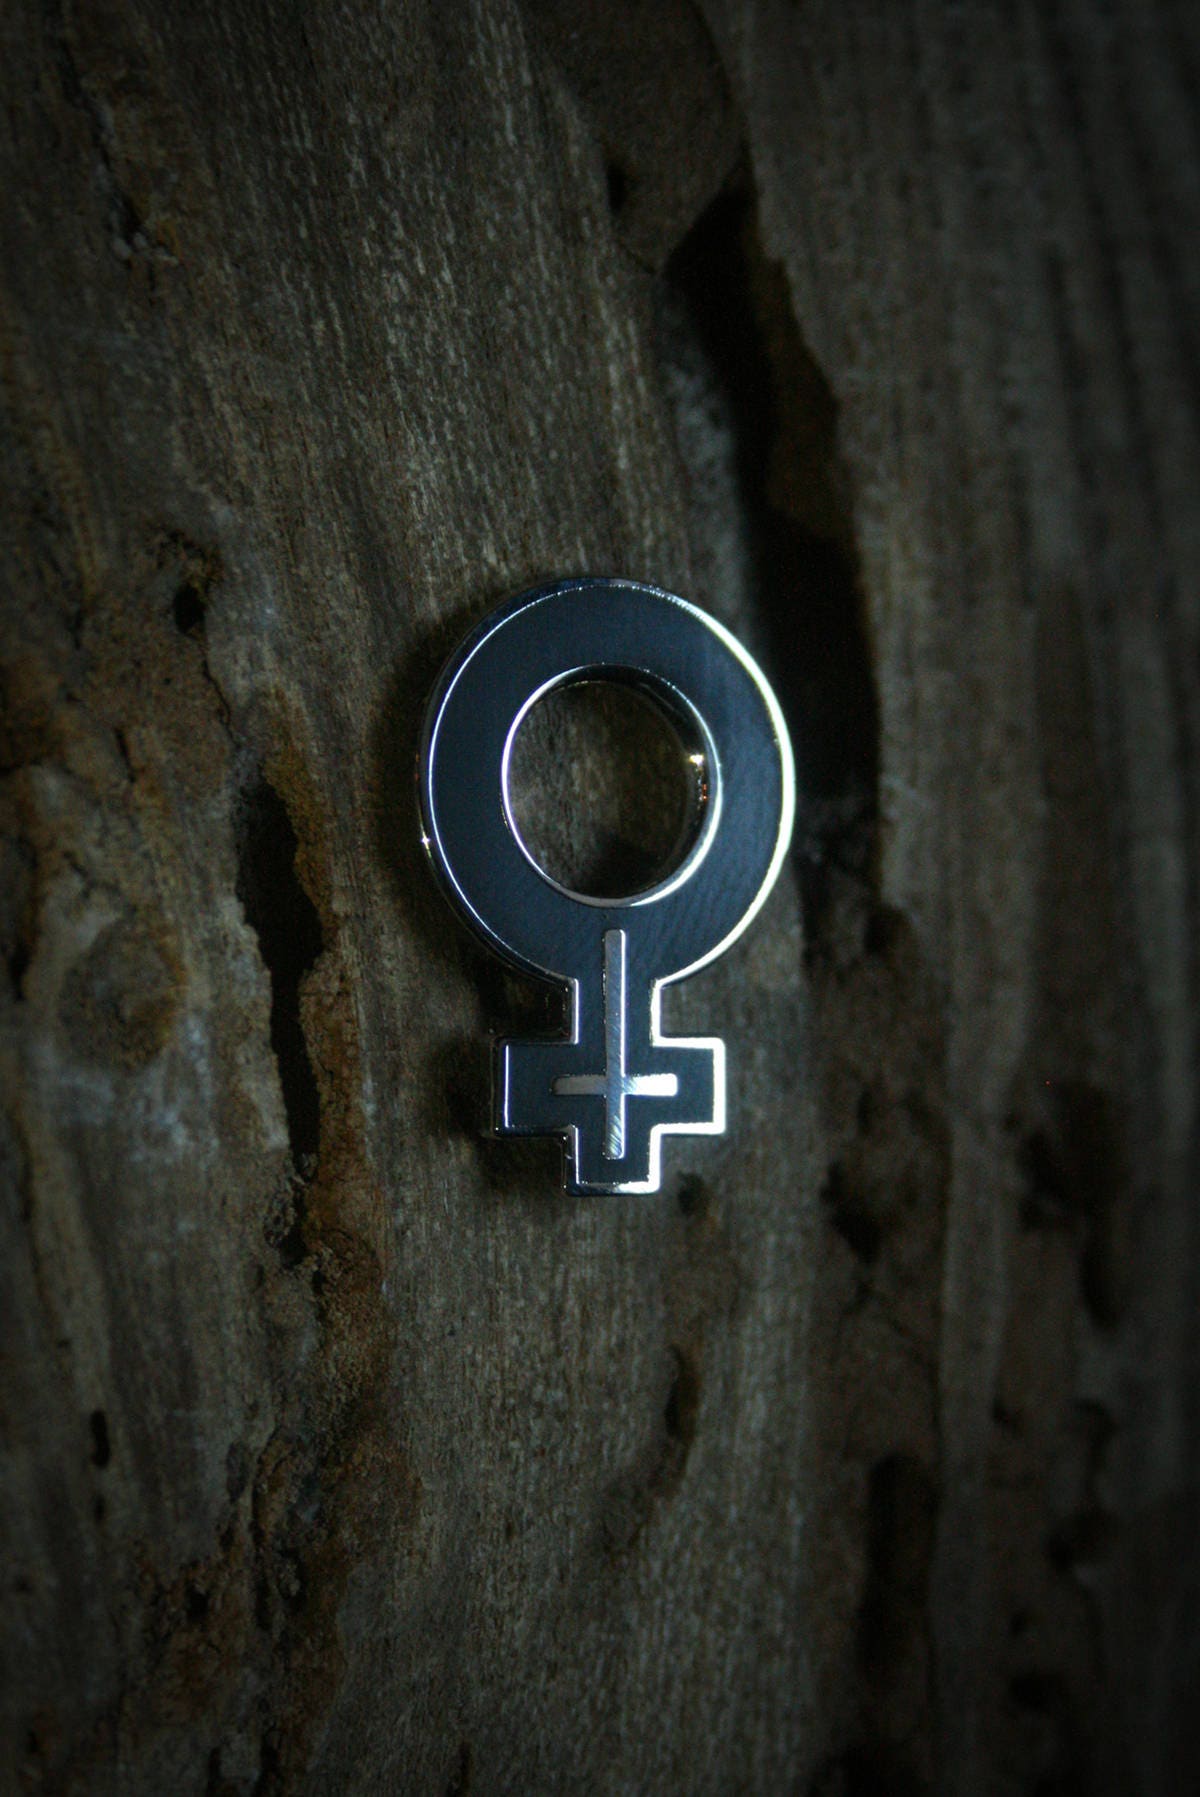 Female symbol with upside down cross - PIN